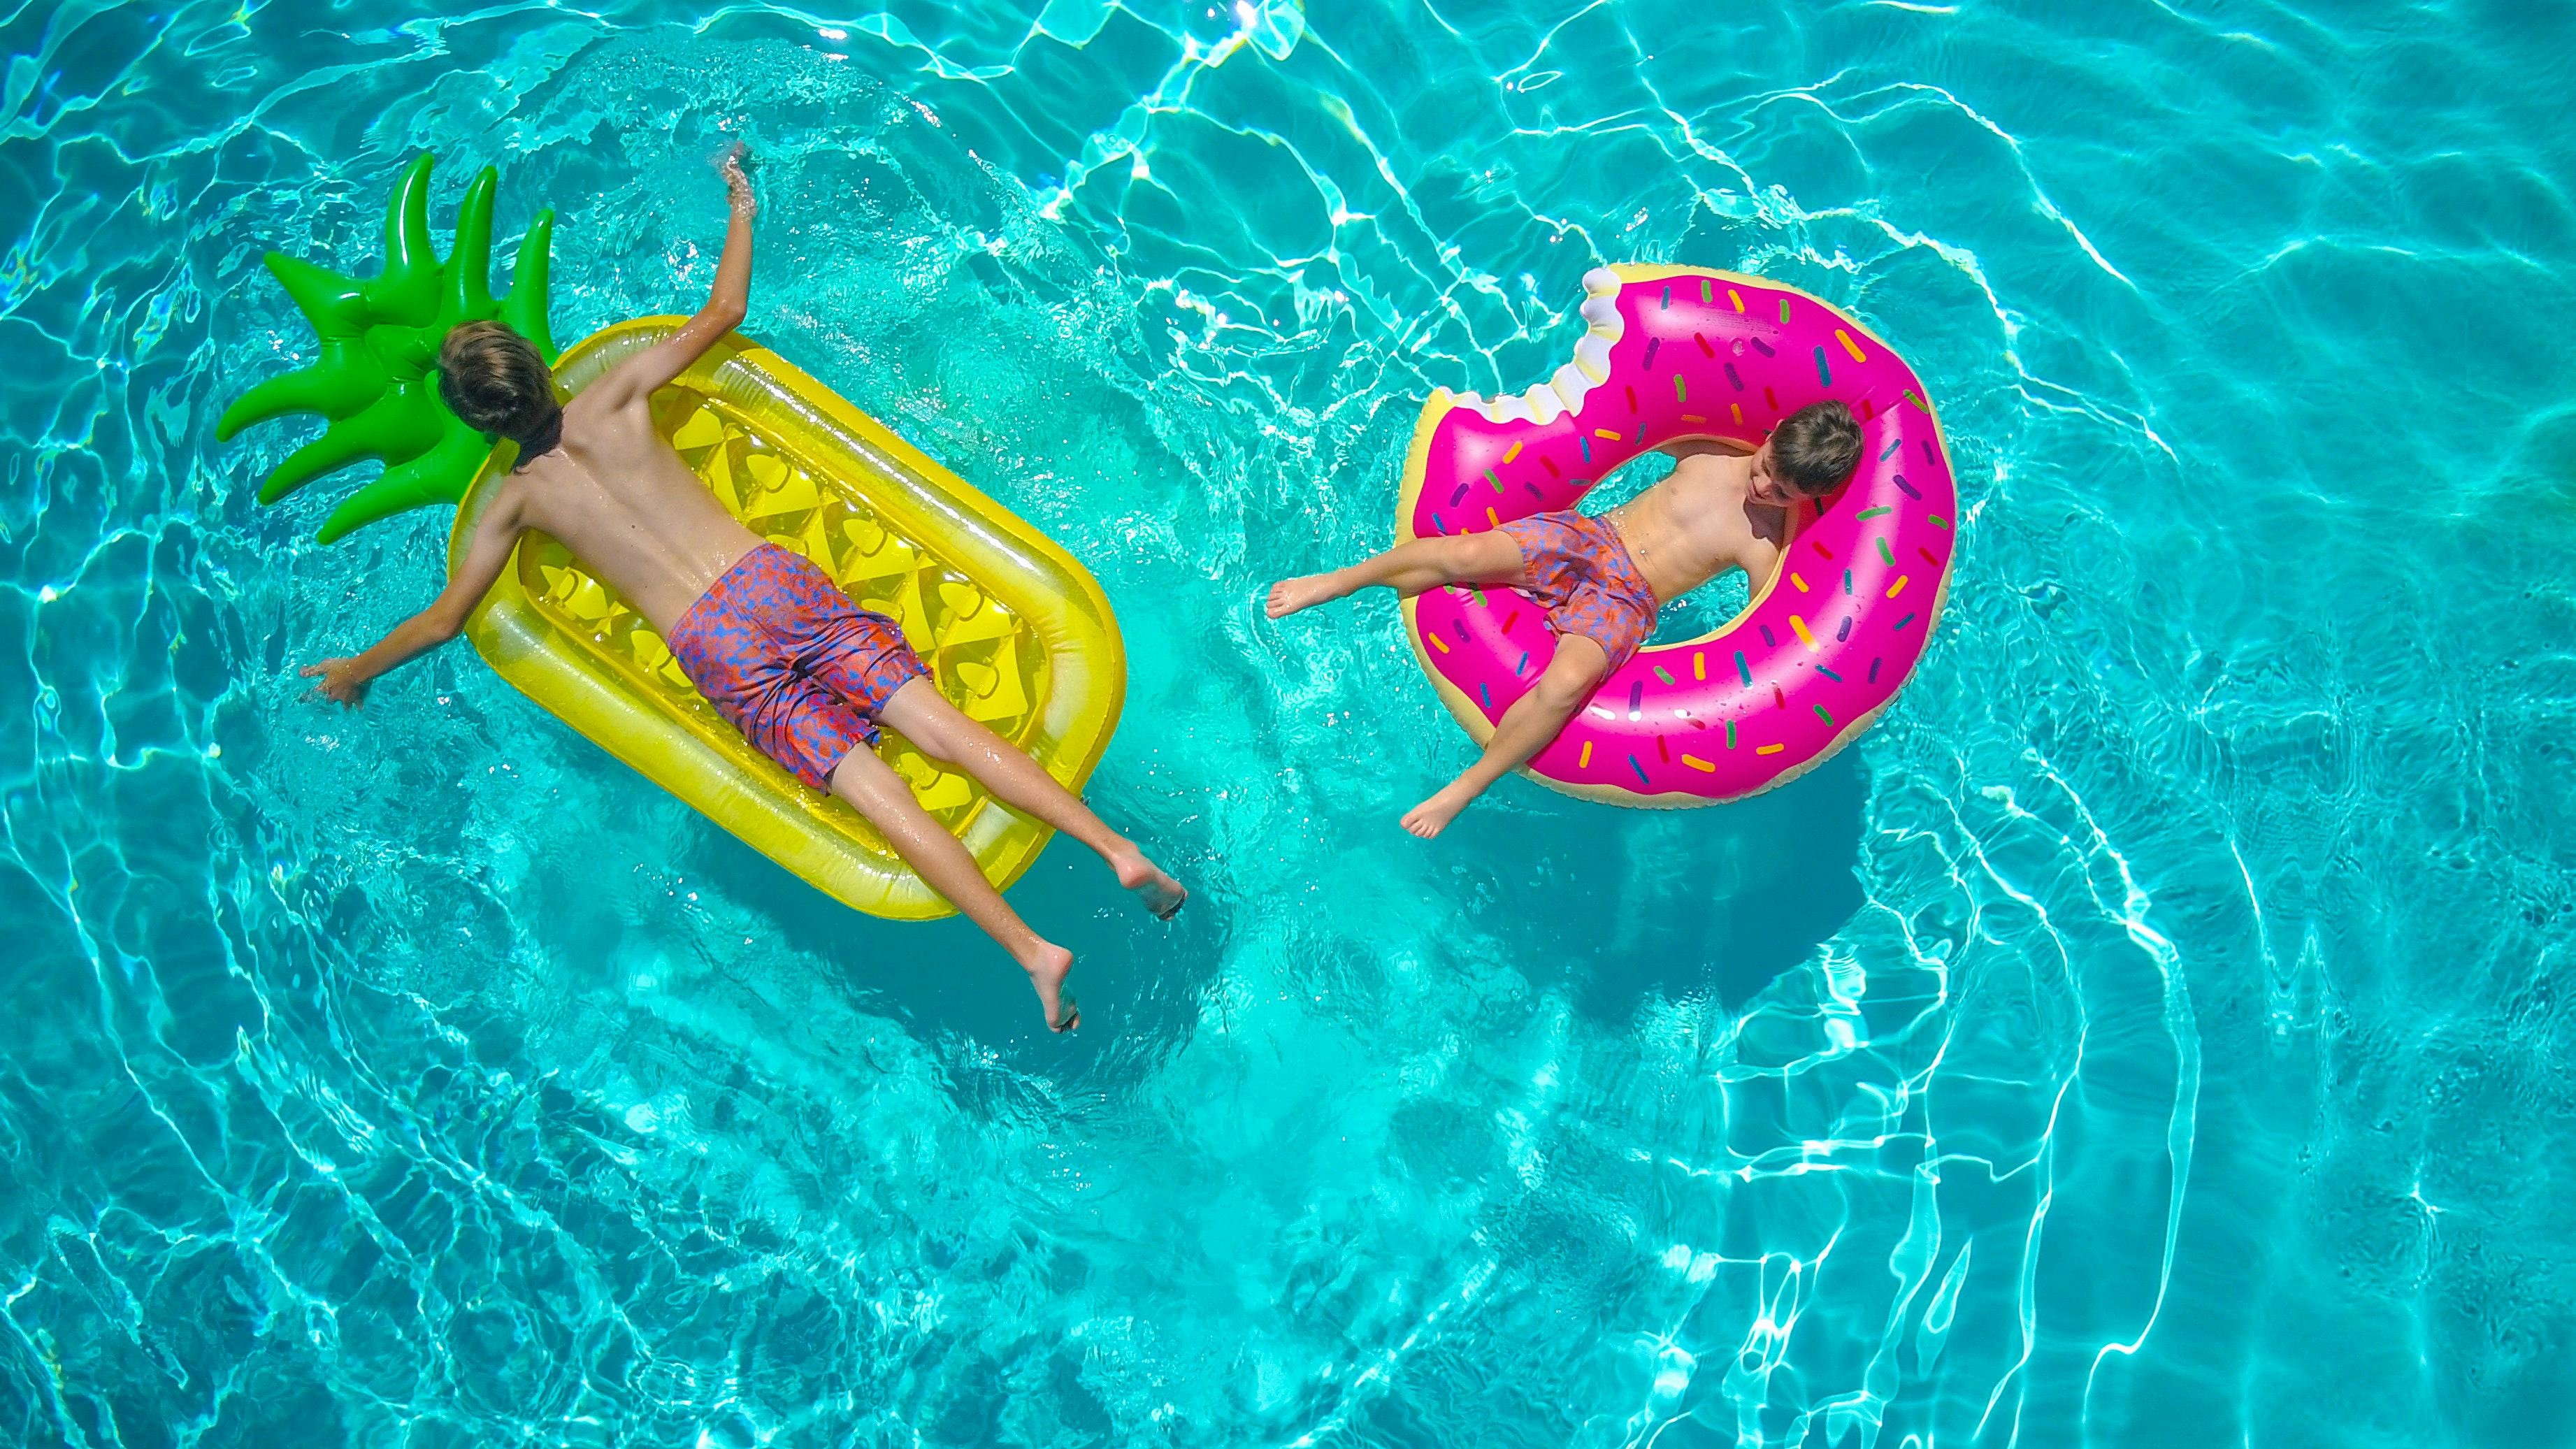 People in a pool on floats